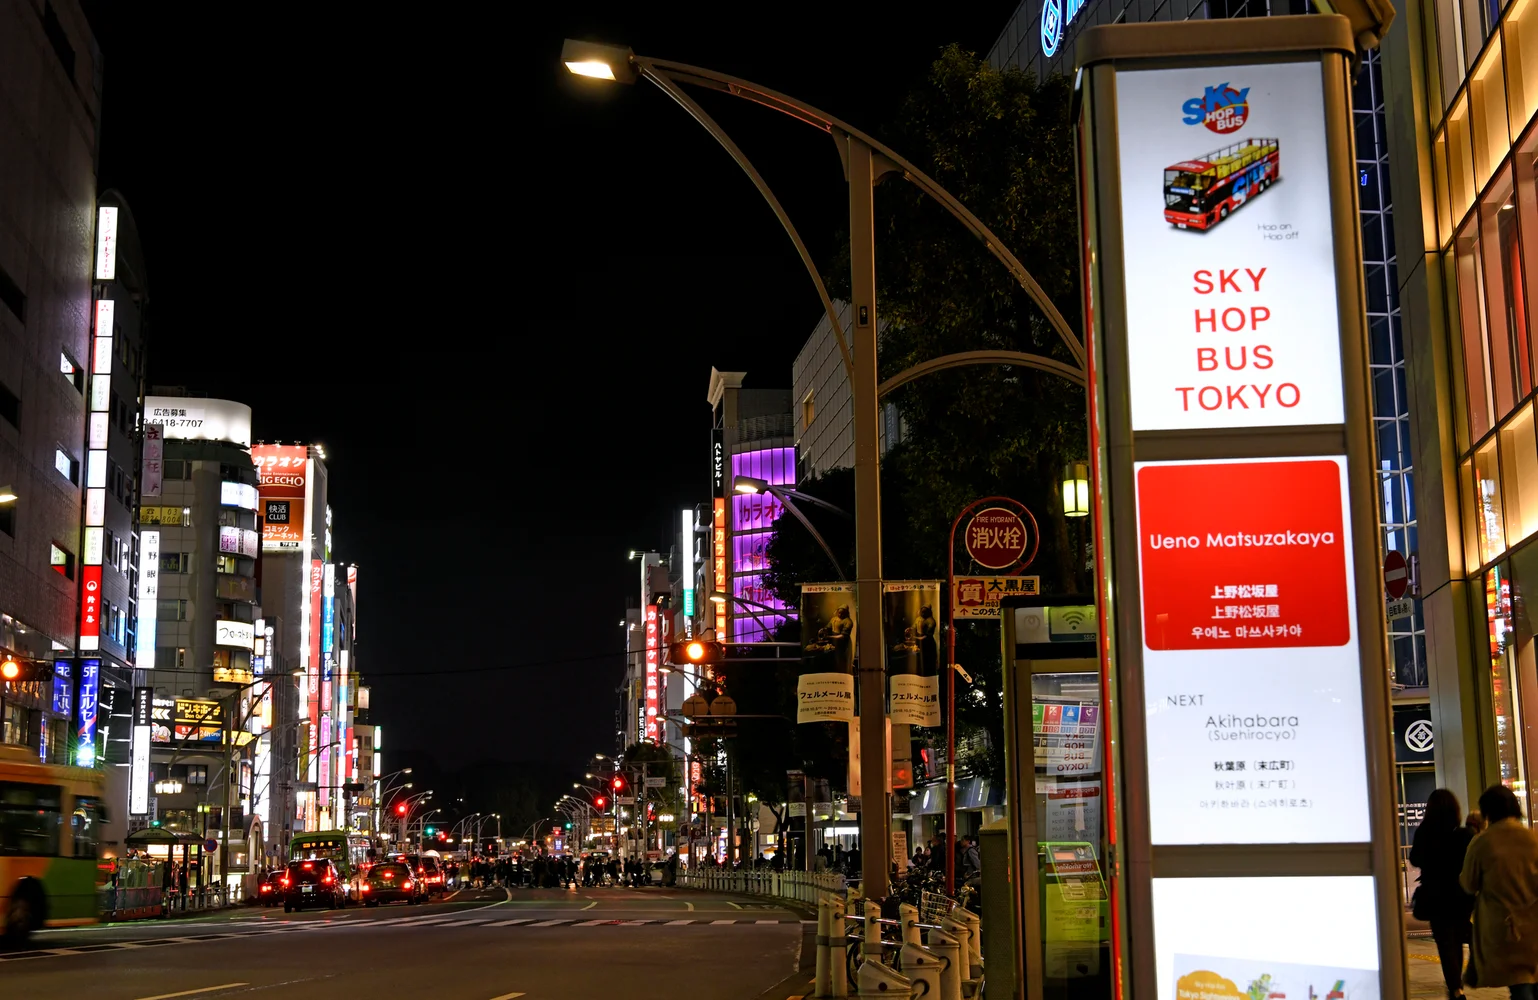 Tokyo Sky Hop Bus Tickets: 1-Day or 2-Day Pass